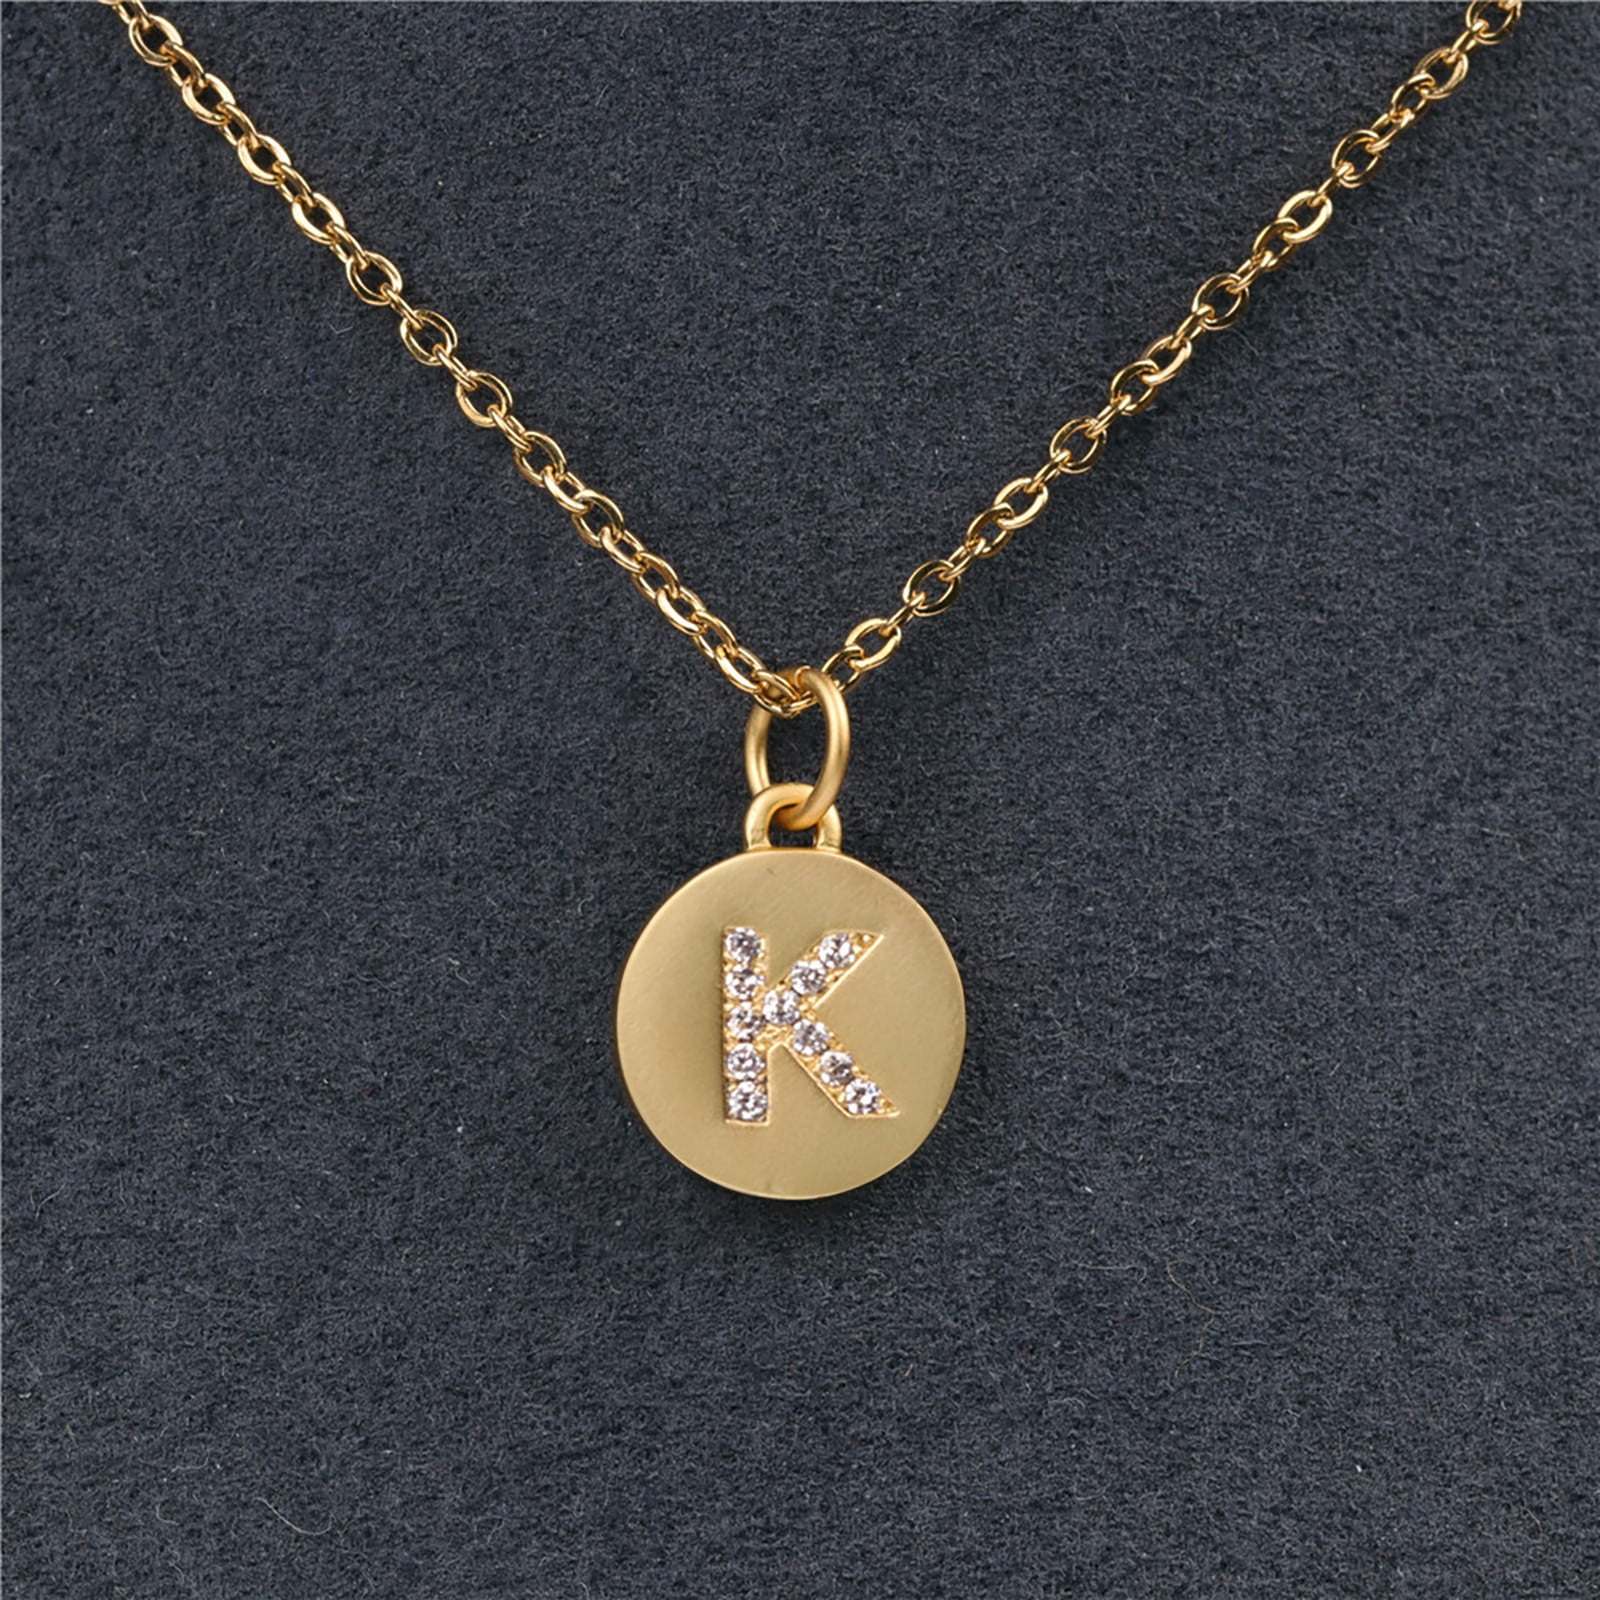 Details about   14K GF CUSTOM MADE J INITIAL PENDENT BABY BOY W CZ PENDENT NECKLACE 